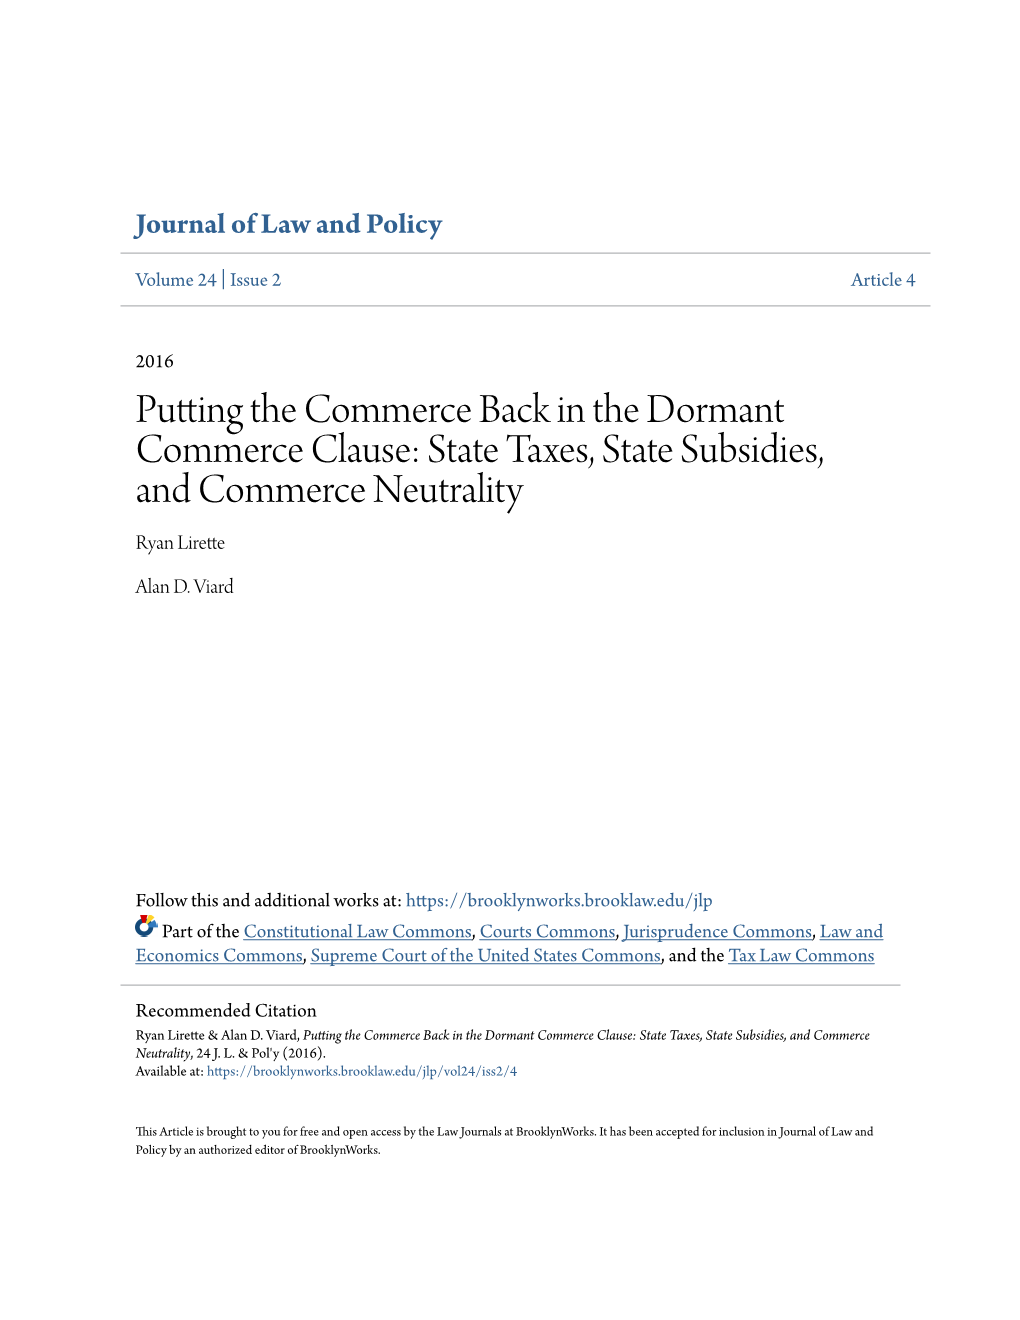 State Taxes, State Subsidies, and Commerce Neutrality Ryan Lirette